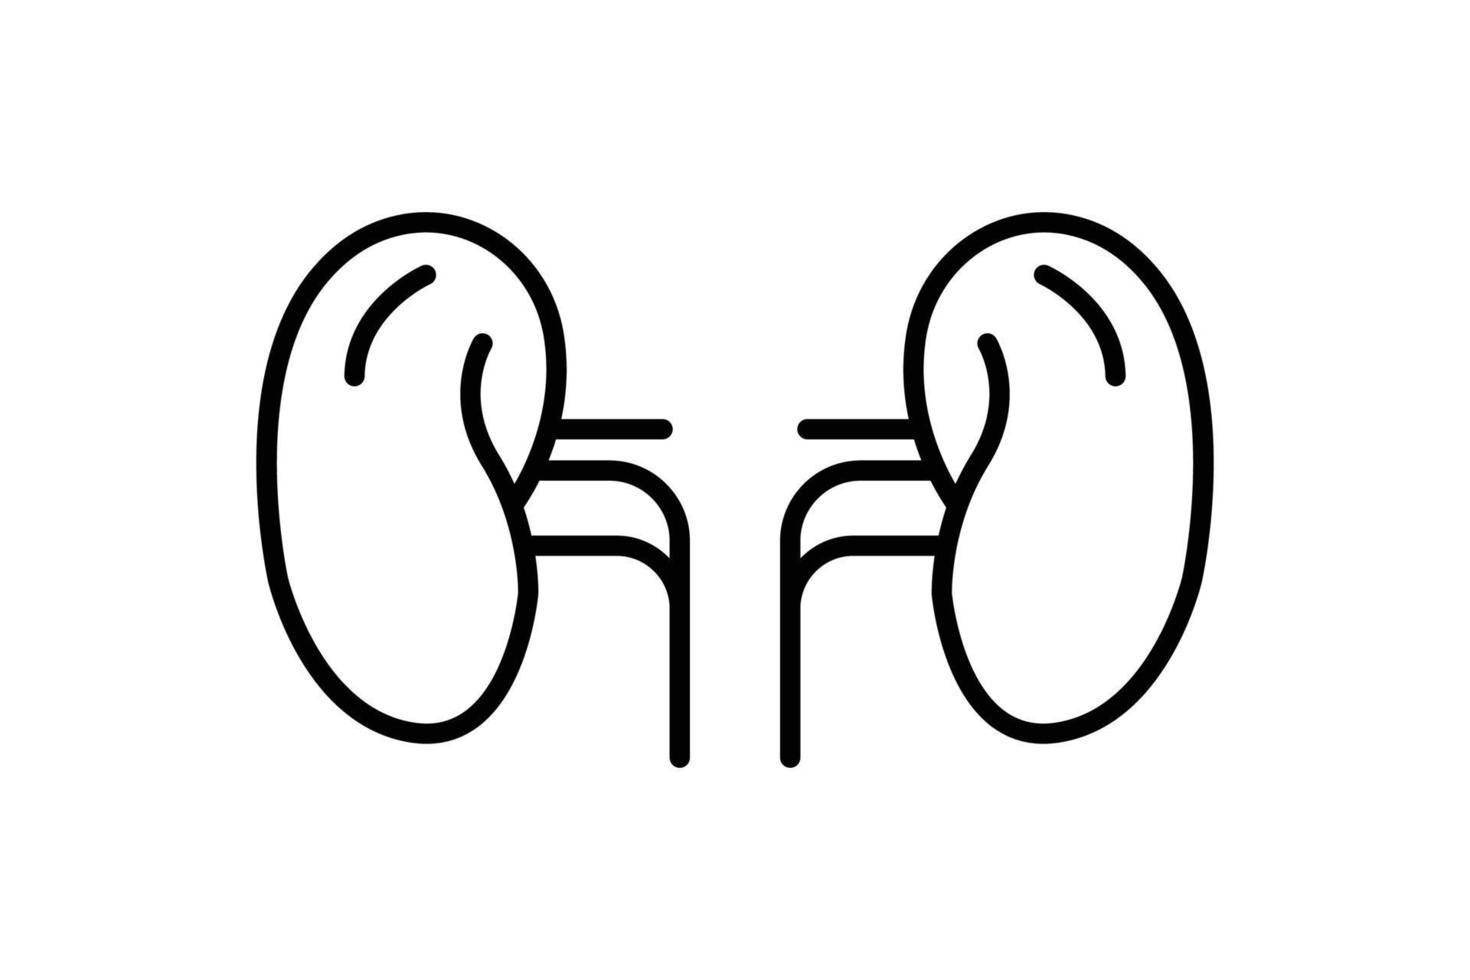 Kidney icon illustration. icon related to internal organ. Line icon style. Simple vector design editable